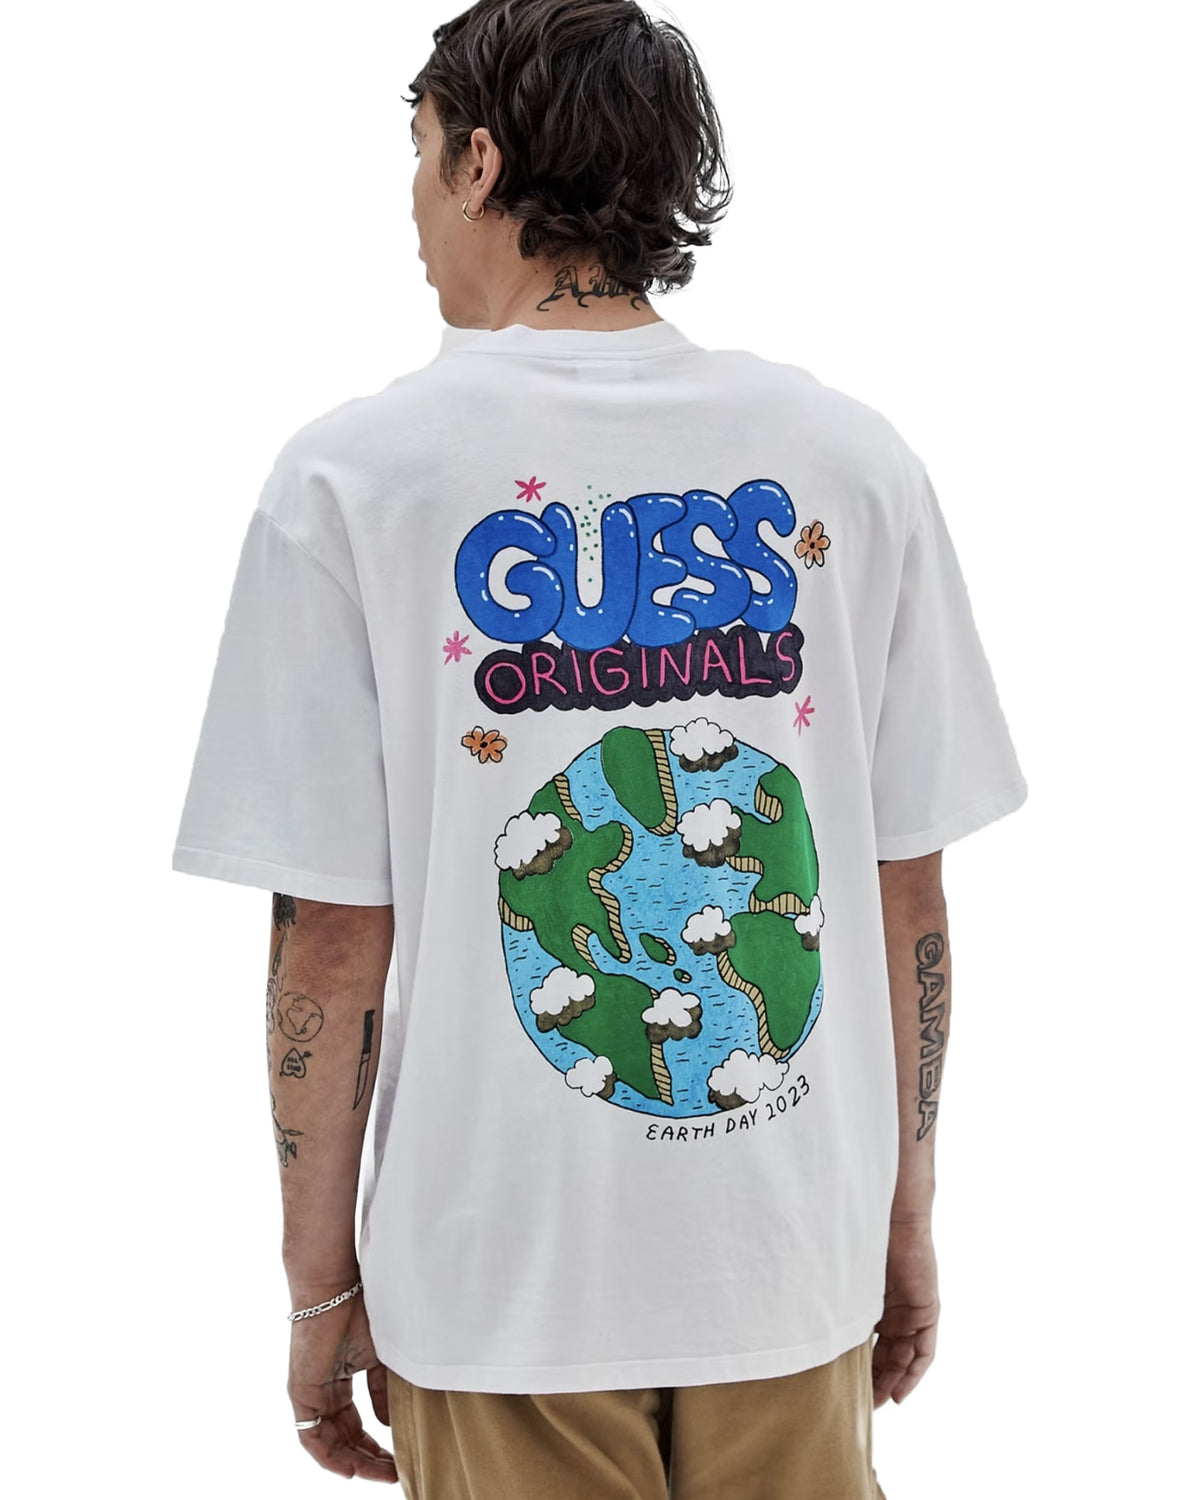 Guess Originals Earth Day Planet Tee White